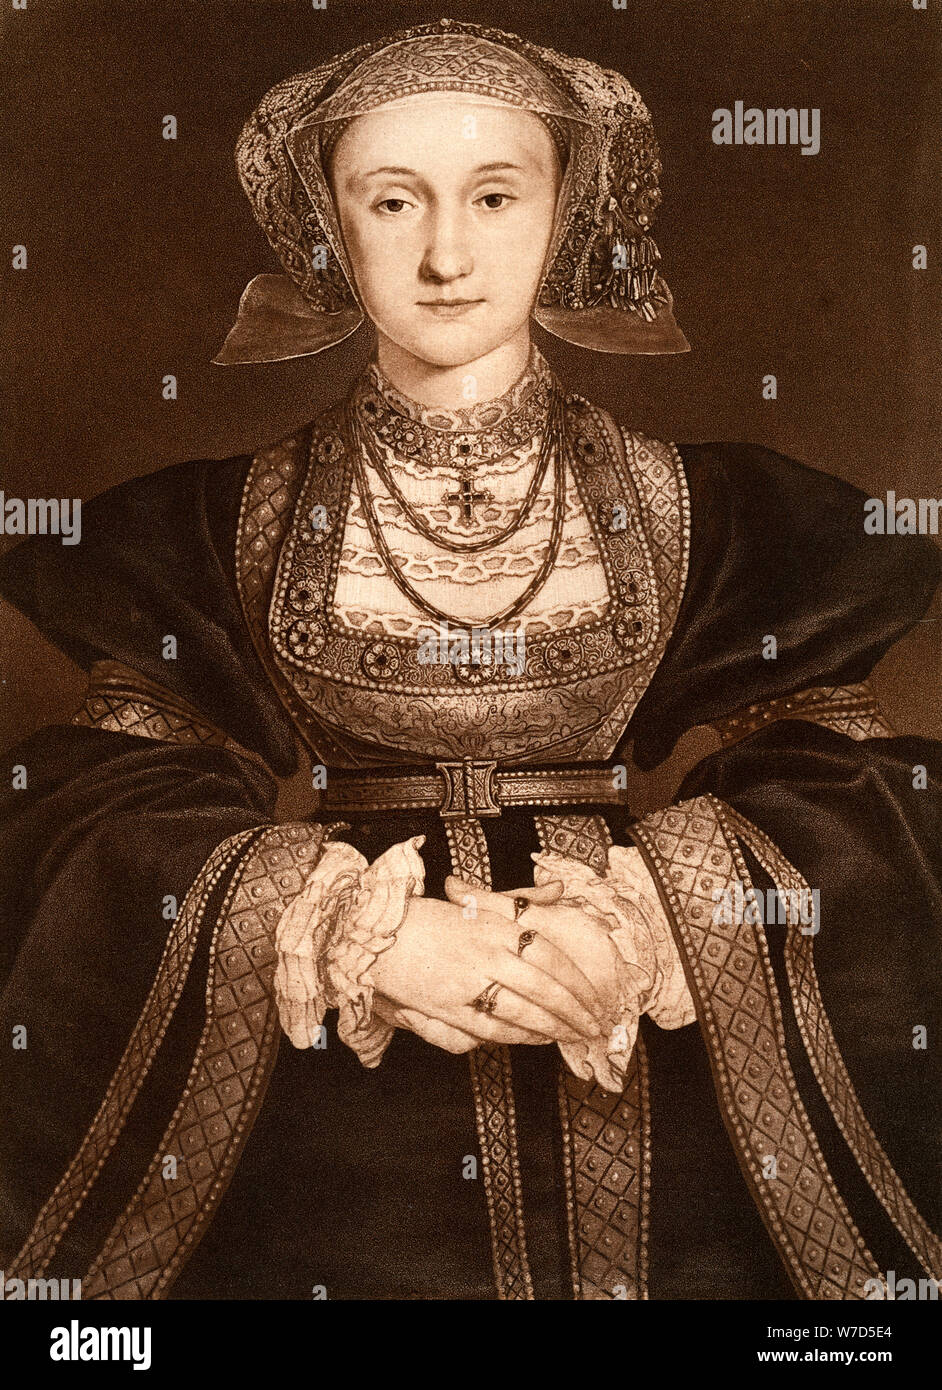 "Anne of Cleves', 1539, (1902). Artista: Hans Holbein il Giovane Foto Stock